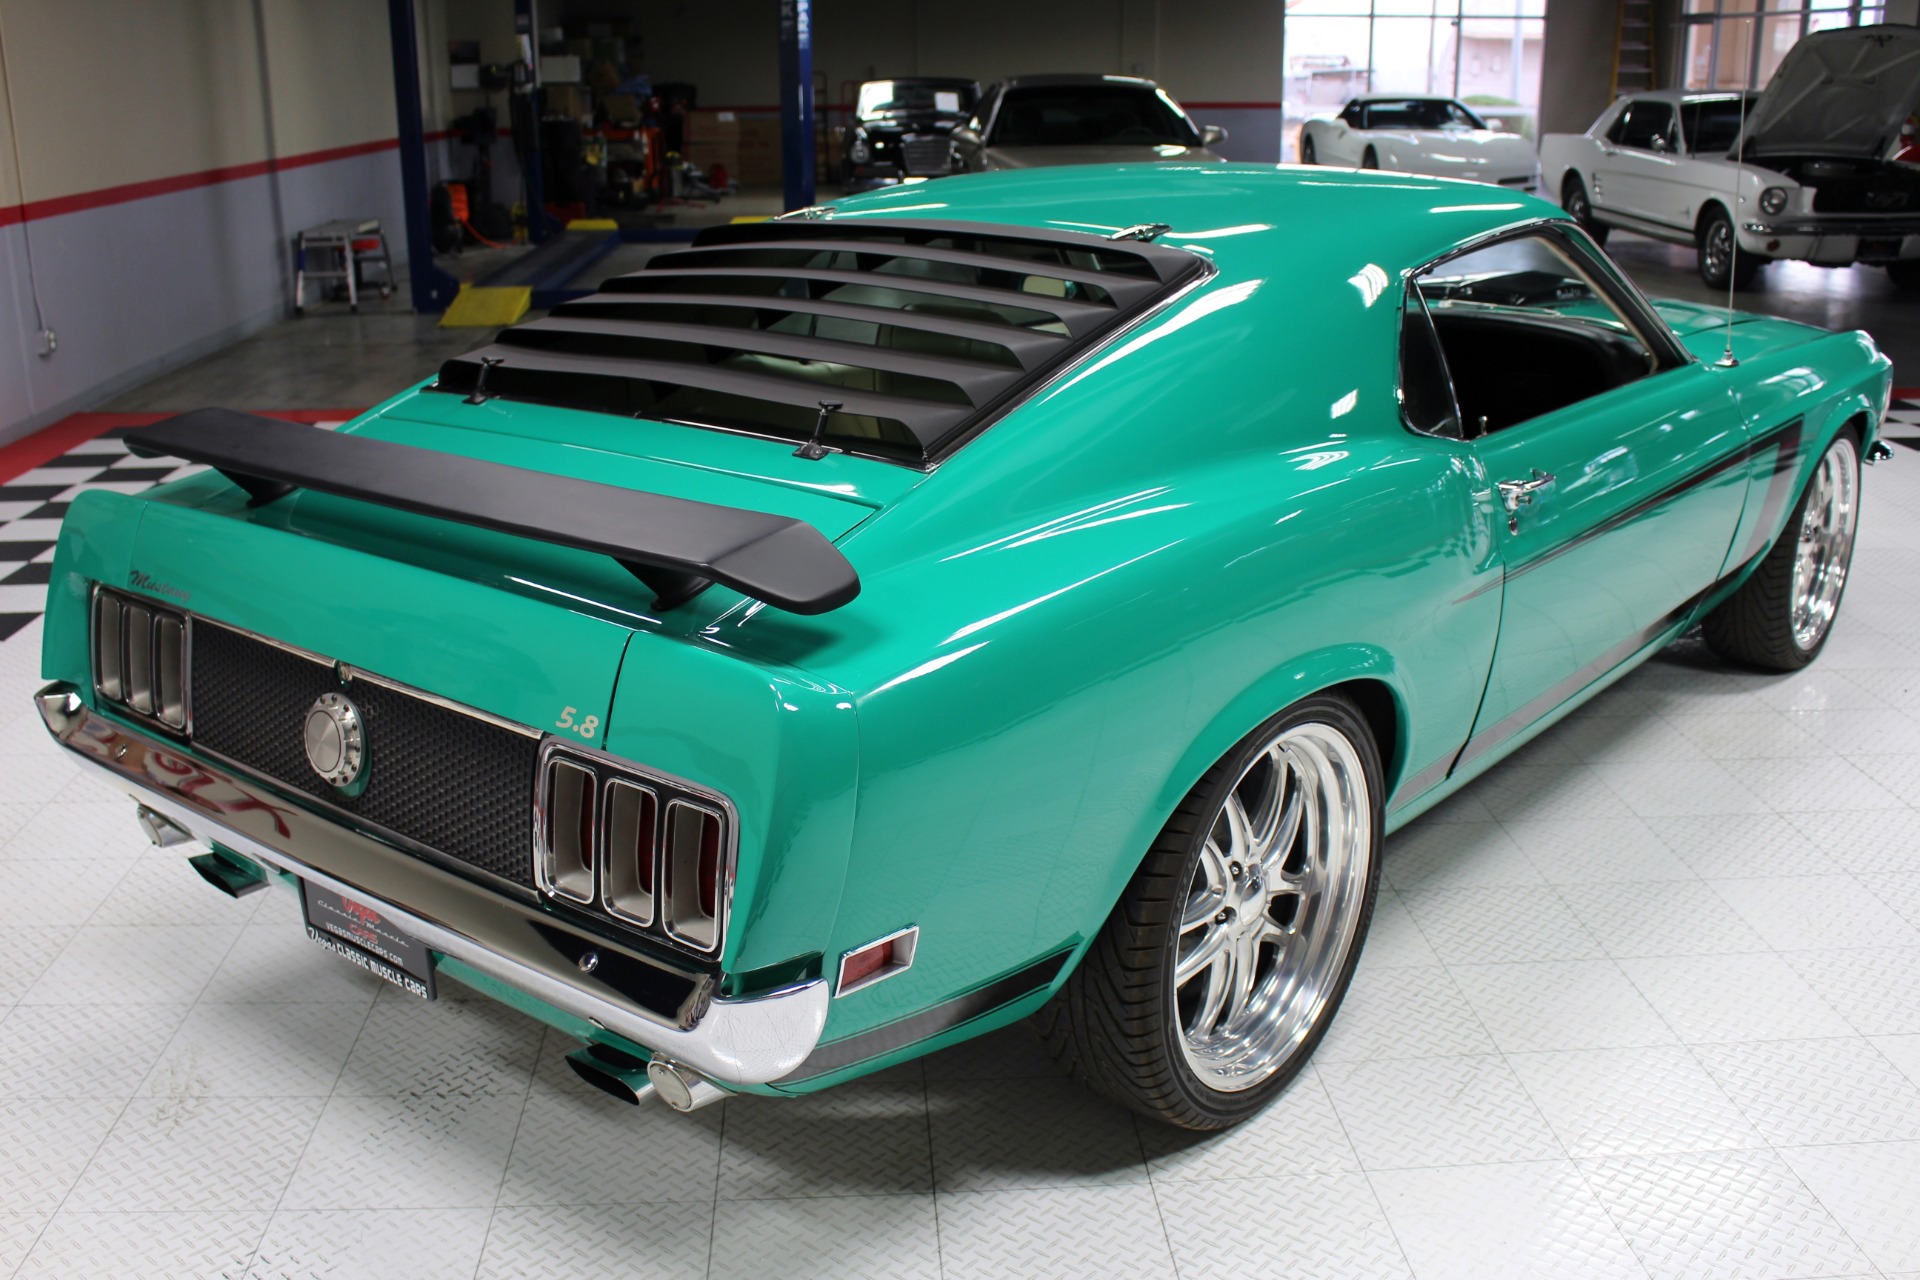 Rebuildable 1970 Mustang Fastback For Sale